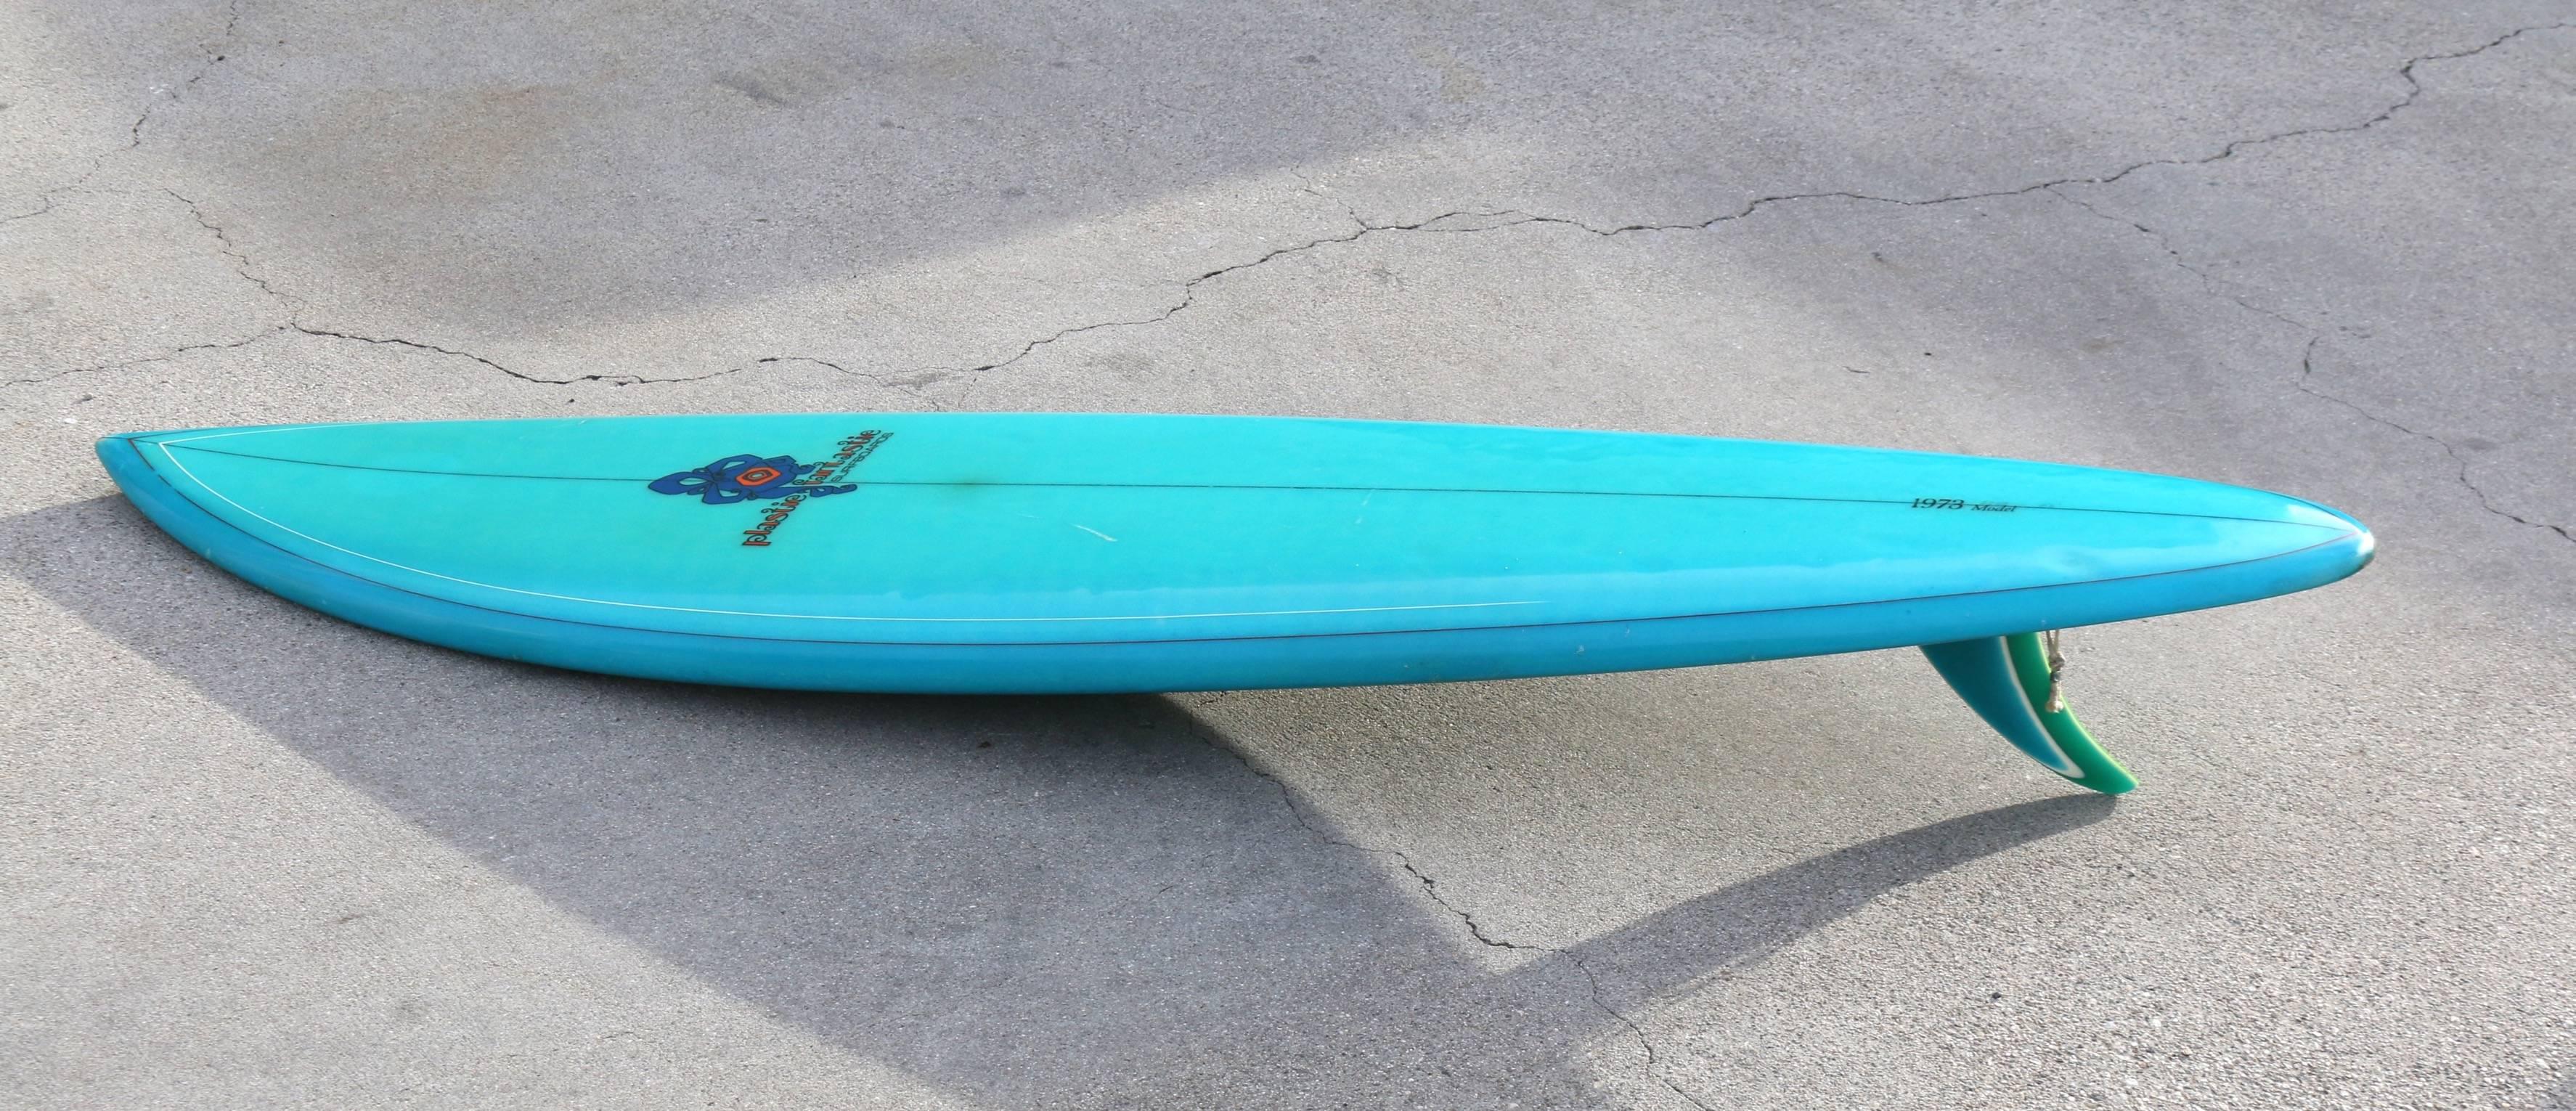 Late 20th Century Plastic Fantastic Solid Turquoise Blue, Short Board Surfboard Circa 1970s 